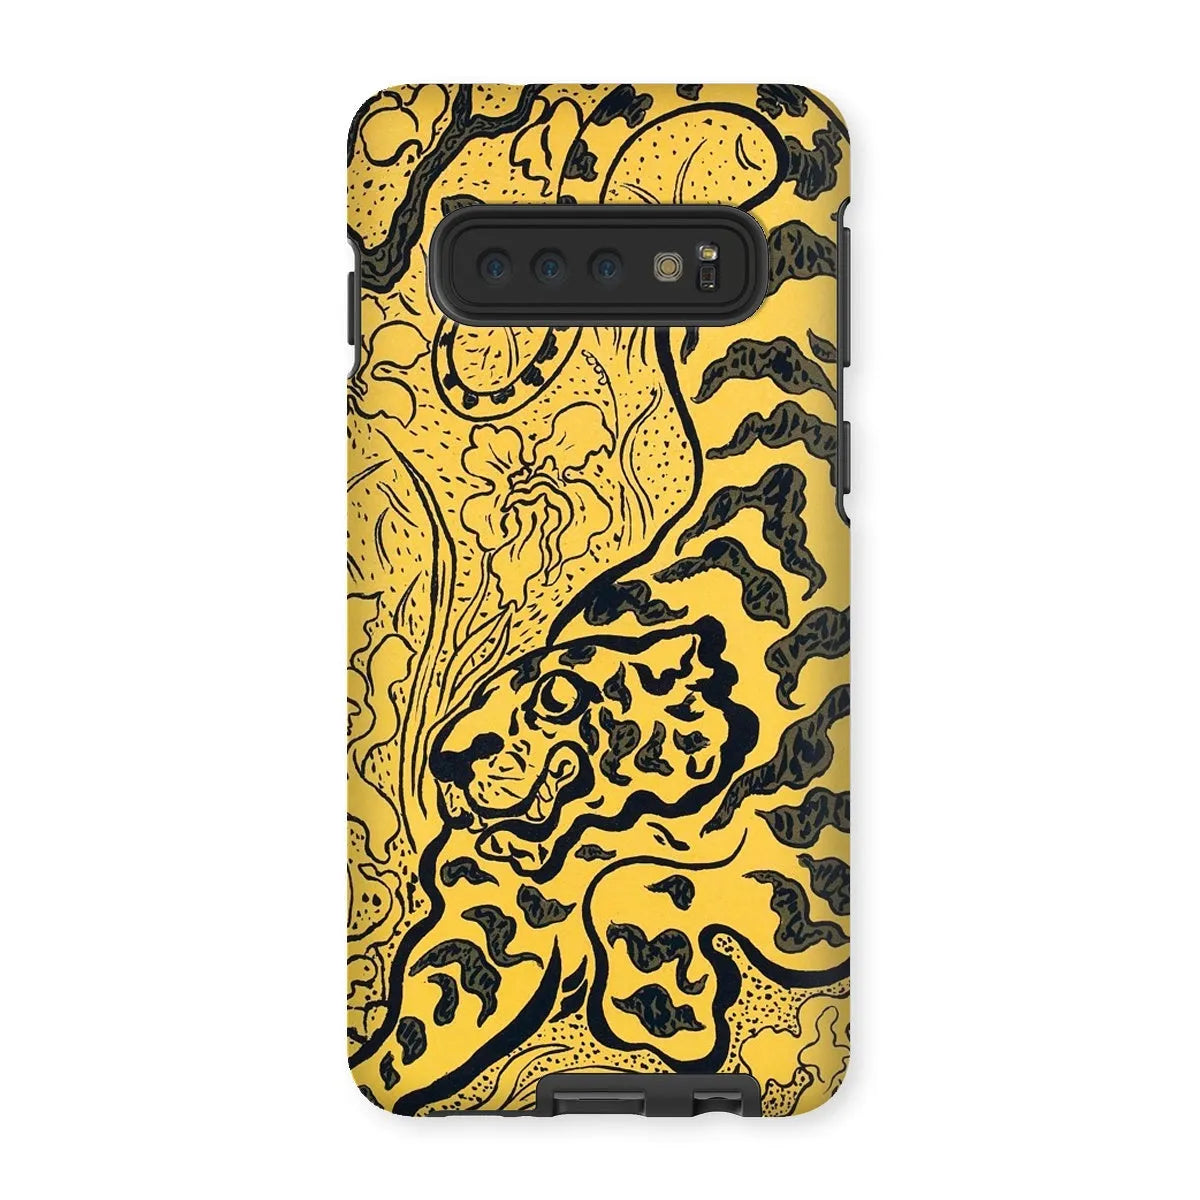 Tiger In The Jungle - Graphic Art Phone Case - Paul Ranson - Samsung Galaxy S10 / Matte - Mobile Phone Cases